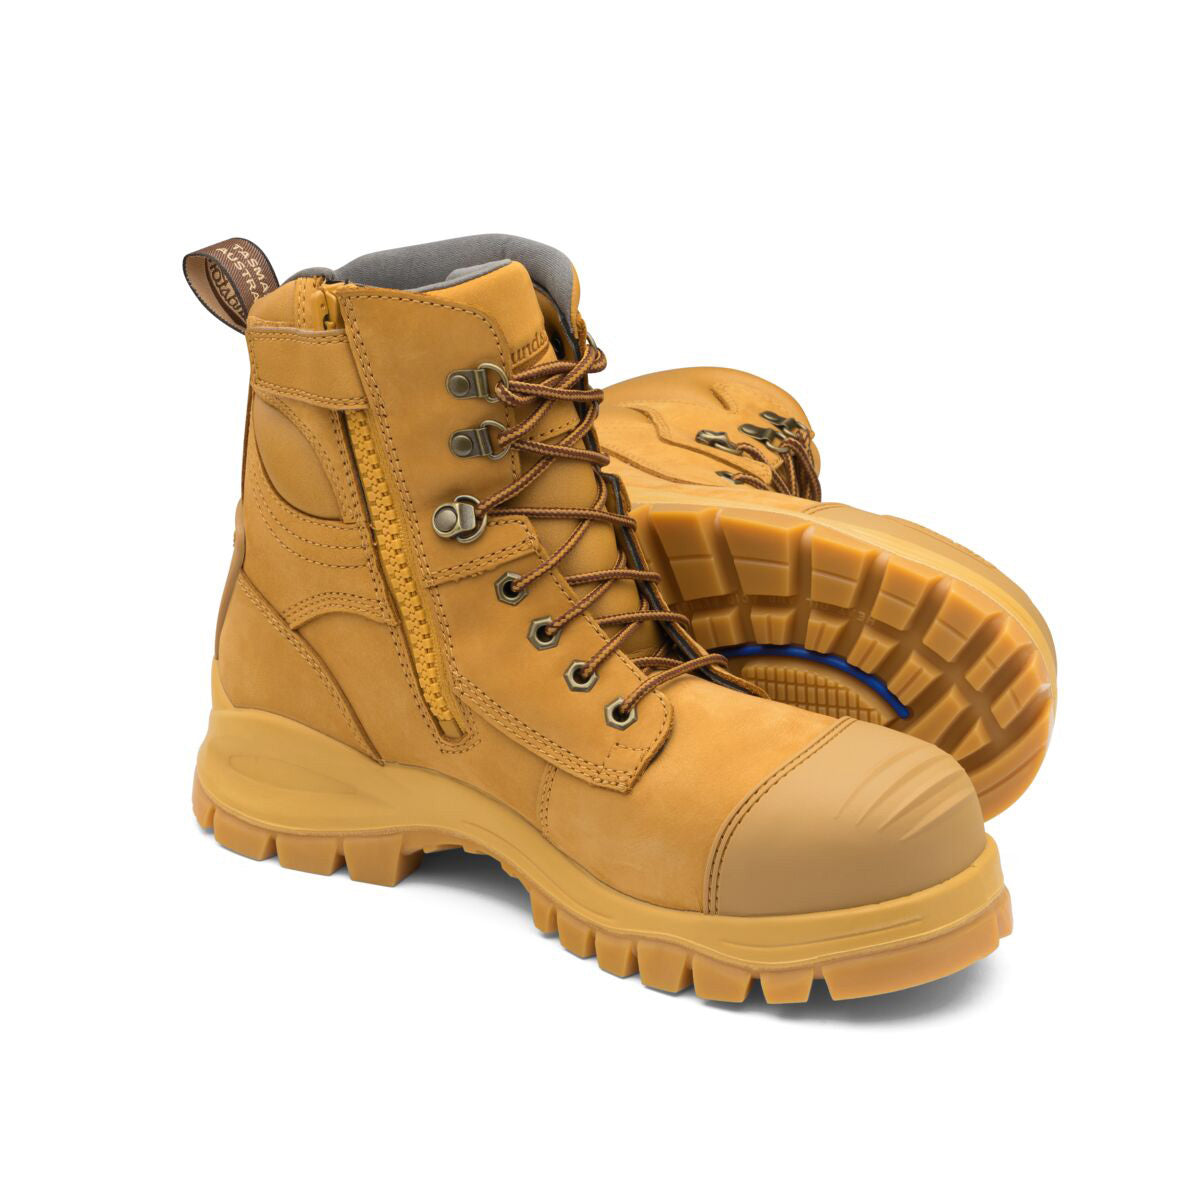 Blundstone Size Men's 3/Women's 5 Yellow #992 Leather Steel Toe Boots With Rubber